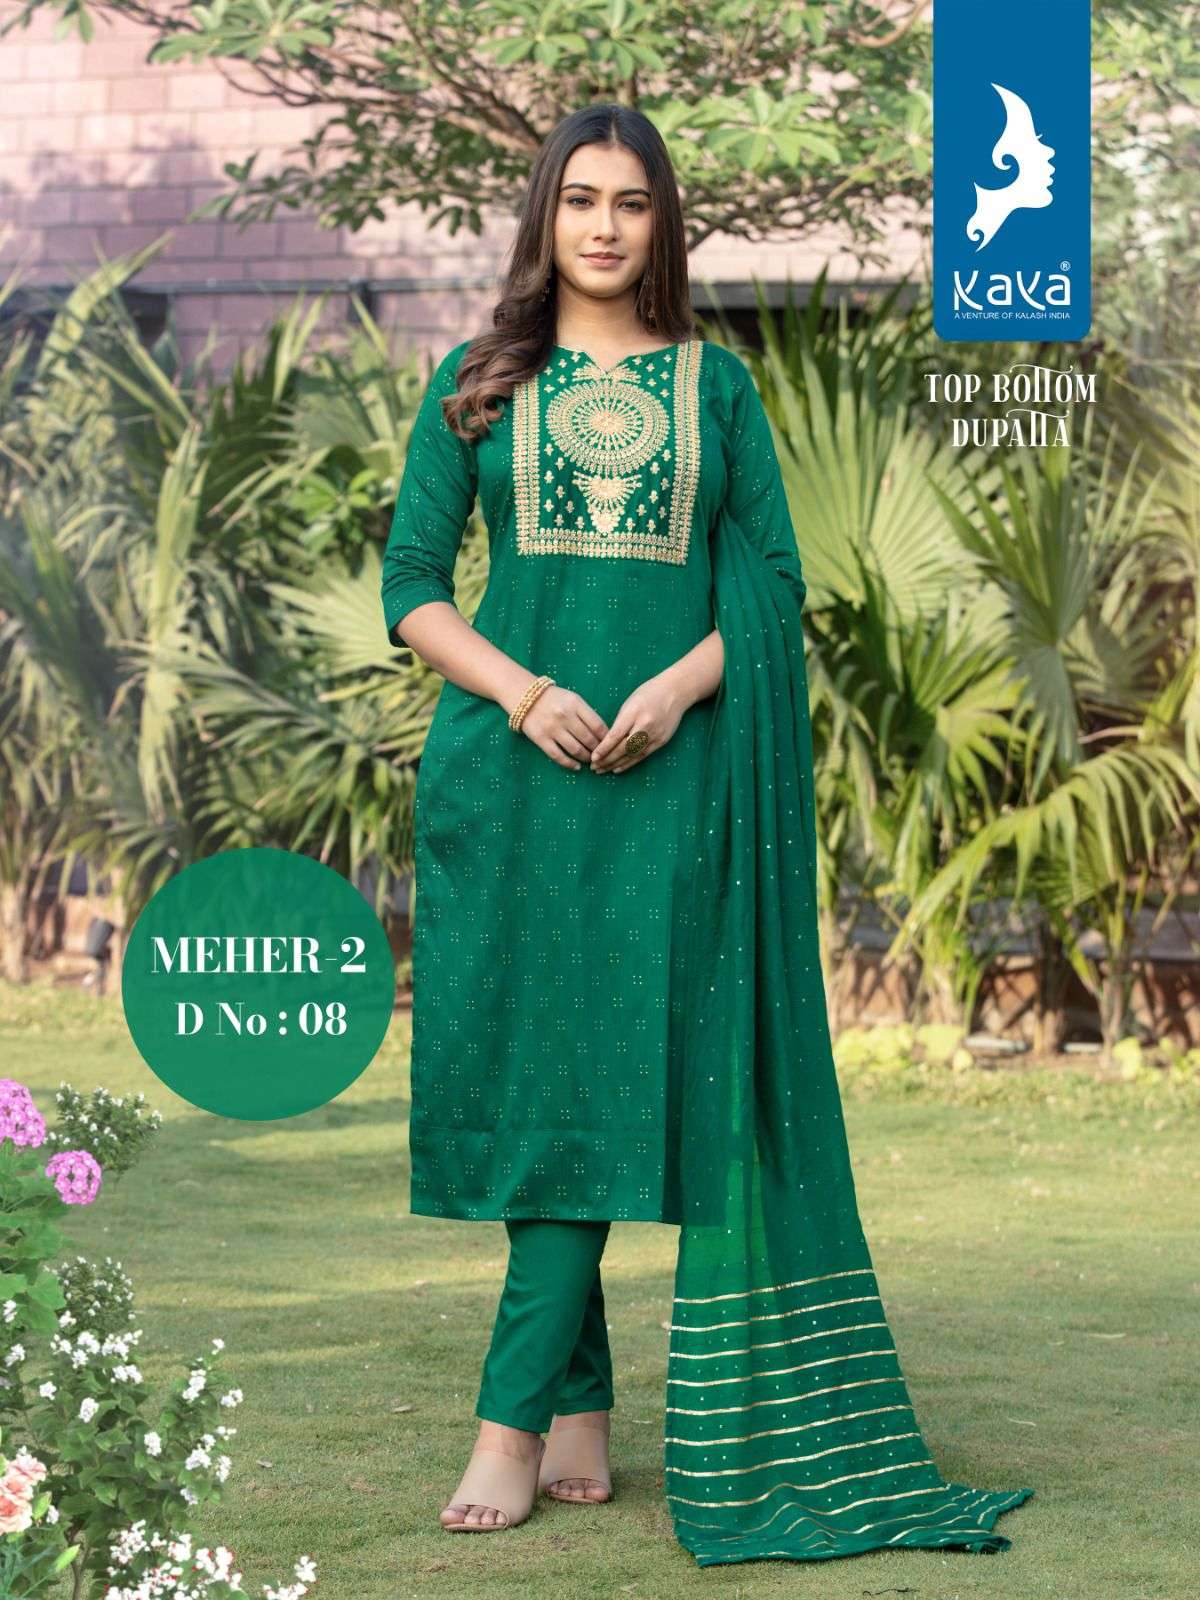 kaya kurtie catalogue meher 2 series meher 01 to meher 08 readymade 3 piece kurtie with pant and duppta set readymade boutiquw style designer suits collection